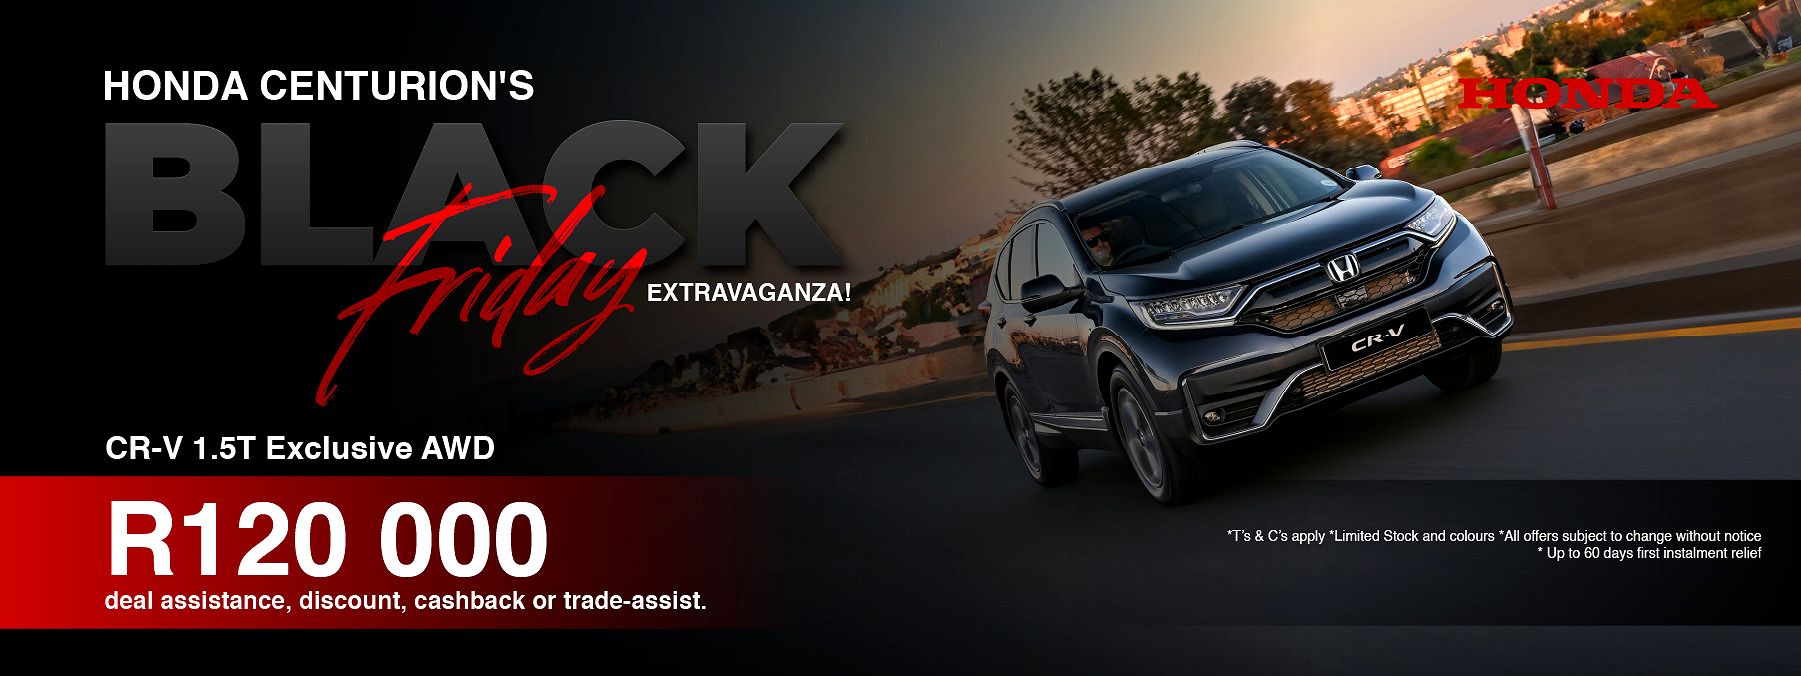 R120,000 | deal assistance, discount, cashback or trade-assist